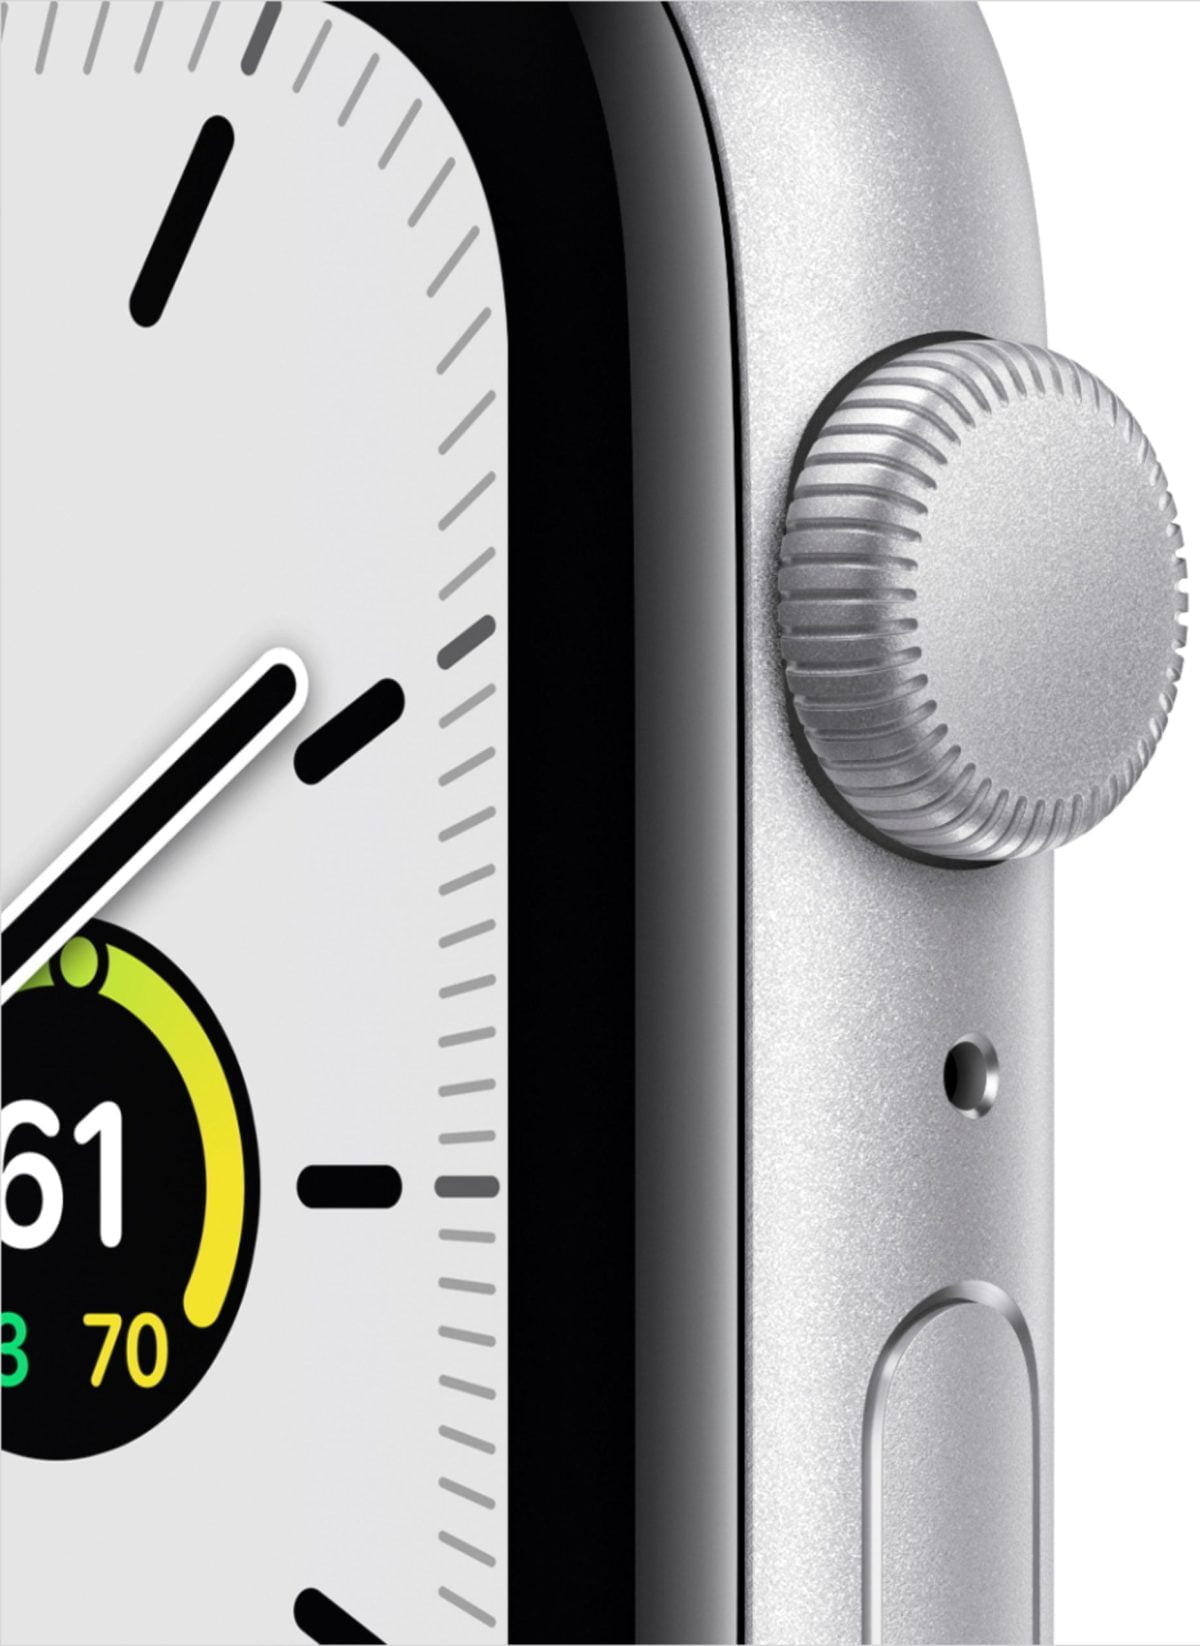 6215919Cv11D Scaled Apple &Lt;H1&Gt;Apple Watch Se (Gps) 44Mm Silver Aluminum Case With White Sport Band - Silver&Lt;/H1&Gt; &Lt;Div Class=&Quot;Product-Description&Quot;&Gt;Apple Watch Se Has The Same Larger Display Size Retina Display As Series 6, So You Can See More At A Glance. Advanced Sensors To Track All Your Fitness And Workout Goals. And Powerful Features To Keep You Healthy And Safe. The Sleep App Lets You Set A Bedtime Routine And Track Your Sleep. And You Also Get Calls, Messages, And Music Right On Your Wrist. It'S A Lot Of Watch For A Lot Less Than You Expected.&Lt;/Div&Gt; Apple Watch Se Apple Watch Se (Gps) 44Mm Silver Aluminum Case With White Sport Band - Silver